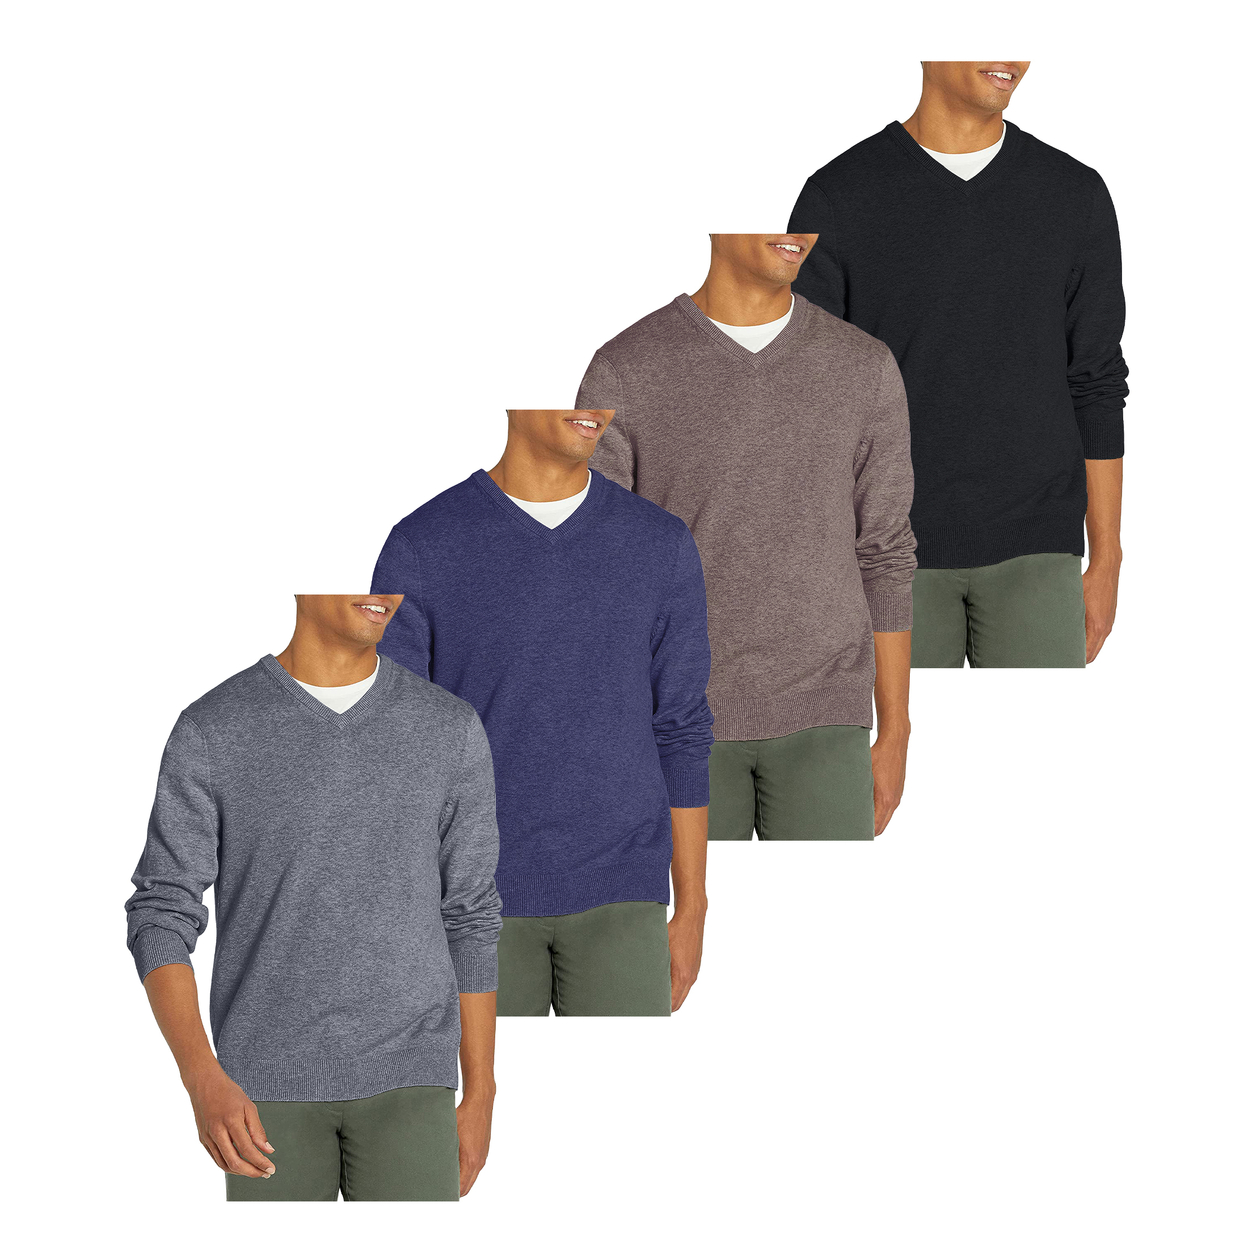 2-Pack: Men's Casual Ultra Soft Slim Fit Warm Knit V-Neck Sweater - Black & Blue, Small